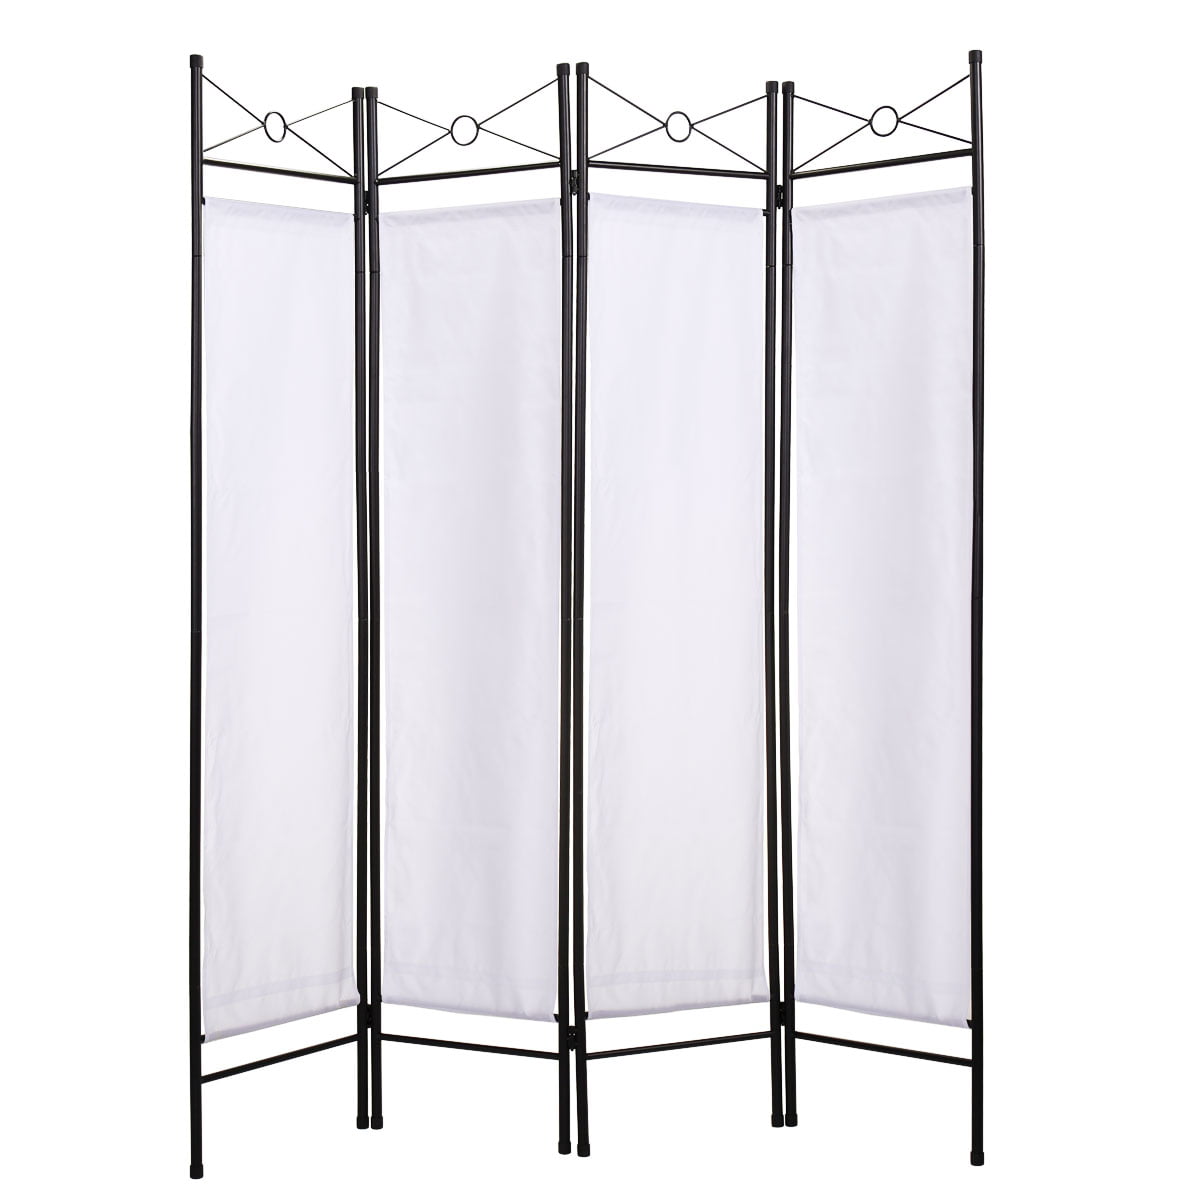 4 Panel Room Divider Privacy Folding Screen Durable Movable Partition White